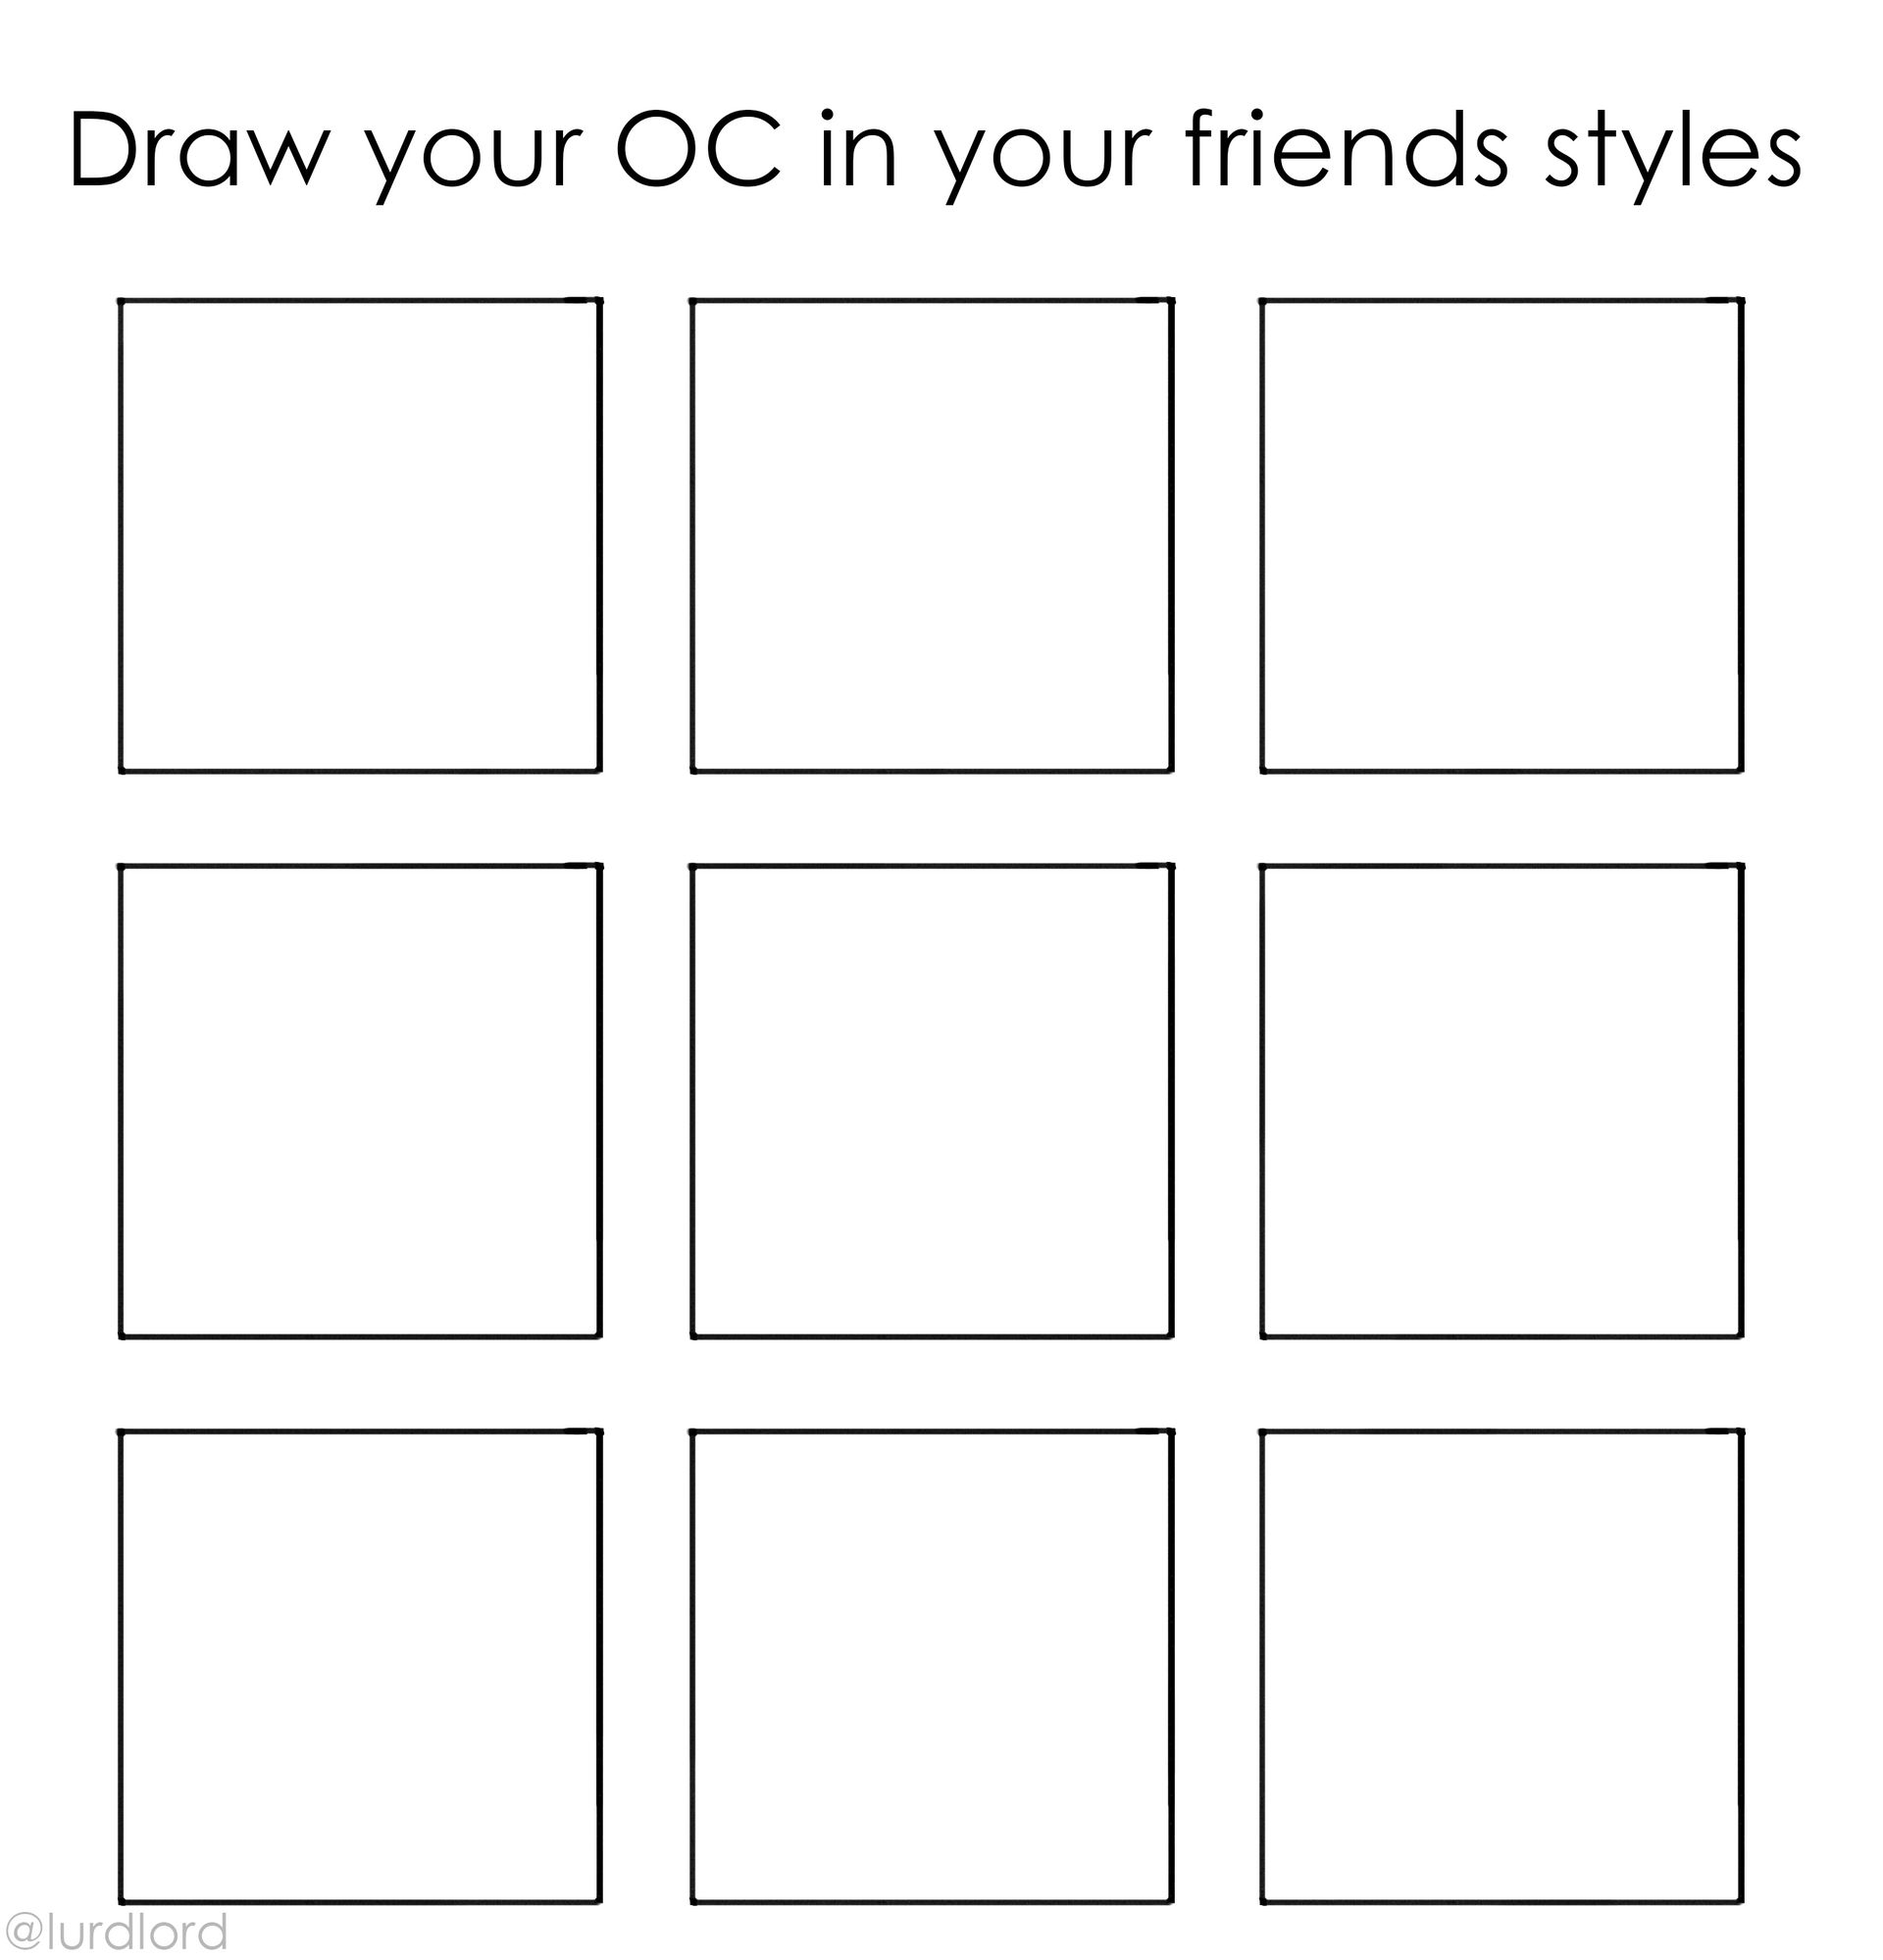 Draw Your Friends Style Meme Blank By Lurd Lord On Deviantart